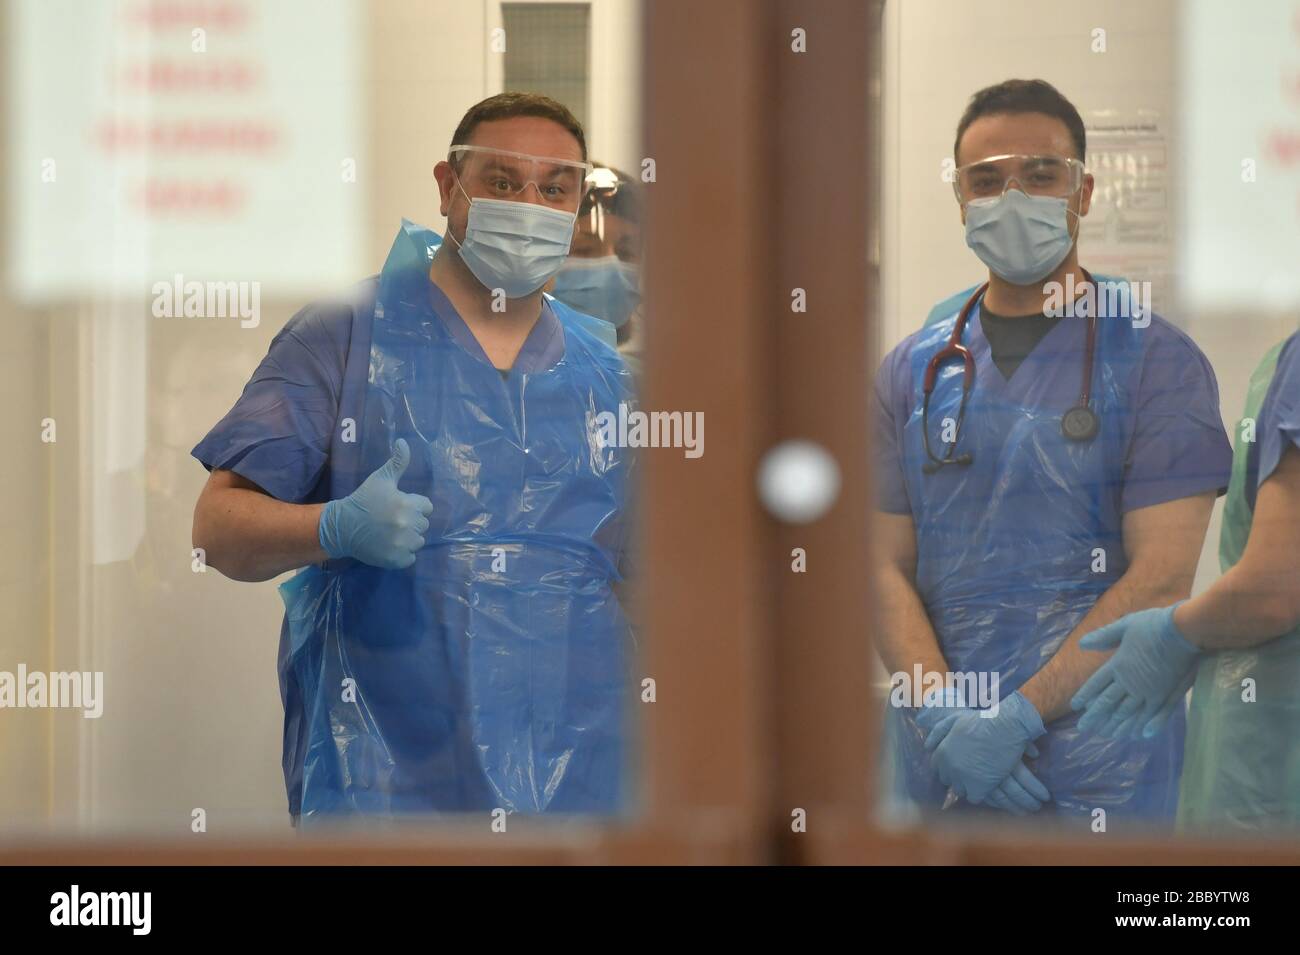 Medical staff wearing personal protective equipment (PPE) wait to receive coronavirus patients at the door of the Respiratory Assessment Unit at the Morriston Hospital in Swansea, as the health services prepare their response to the coronavirus outbreak. Stock Photo